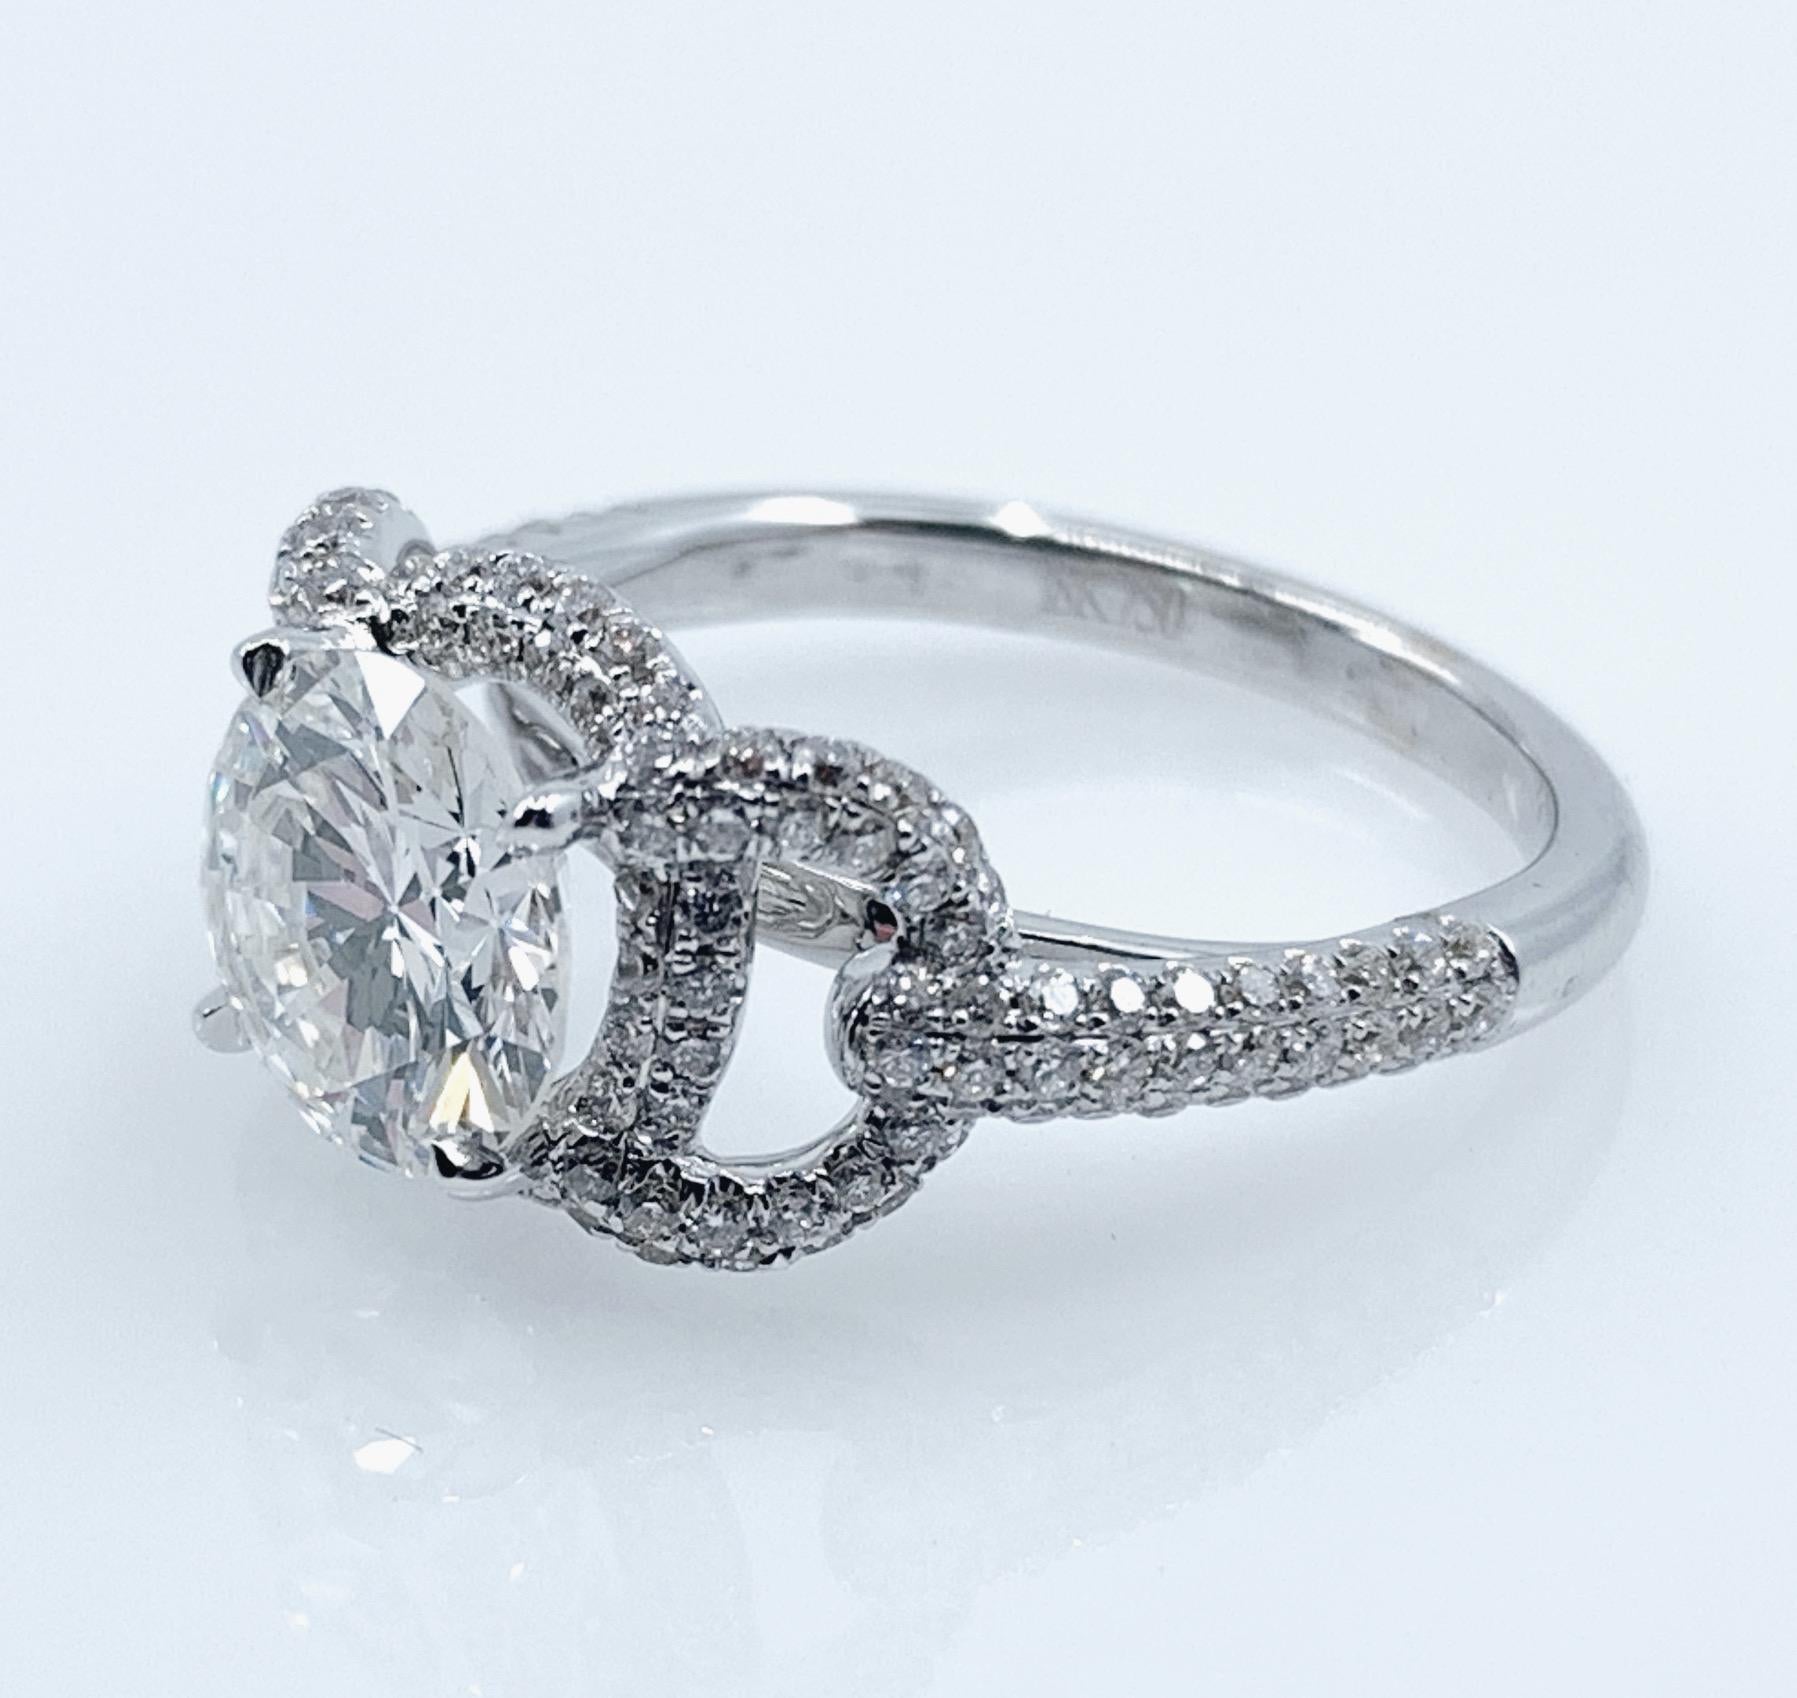 A gorgeous engagement ring or solitaire, featuring a large round brilliant-cut diamond prong-set and slightly elevated over a double halo of good-quality melee white diamonds.  Lapping over the halos at the shoulders are open 